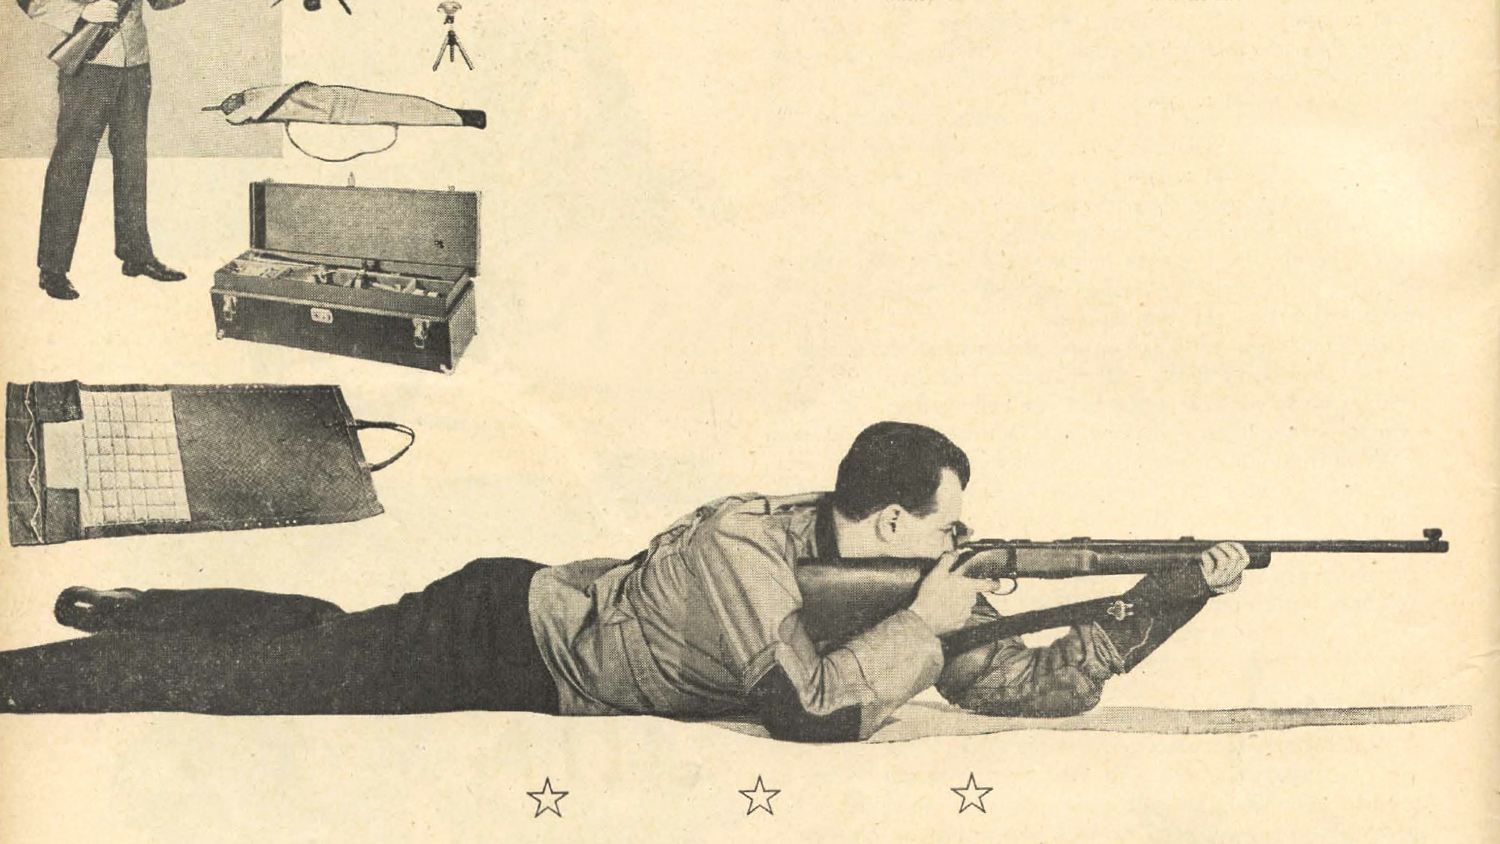 Smallbore rifle gear in the late 1940s